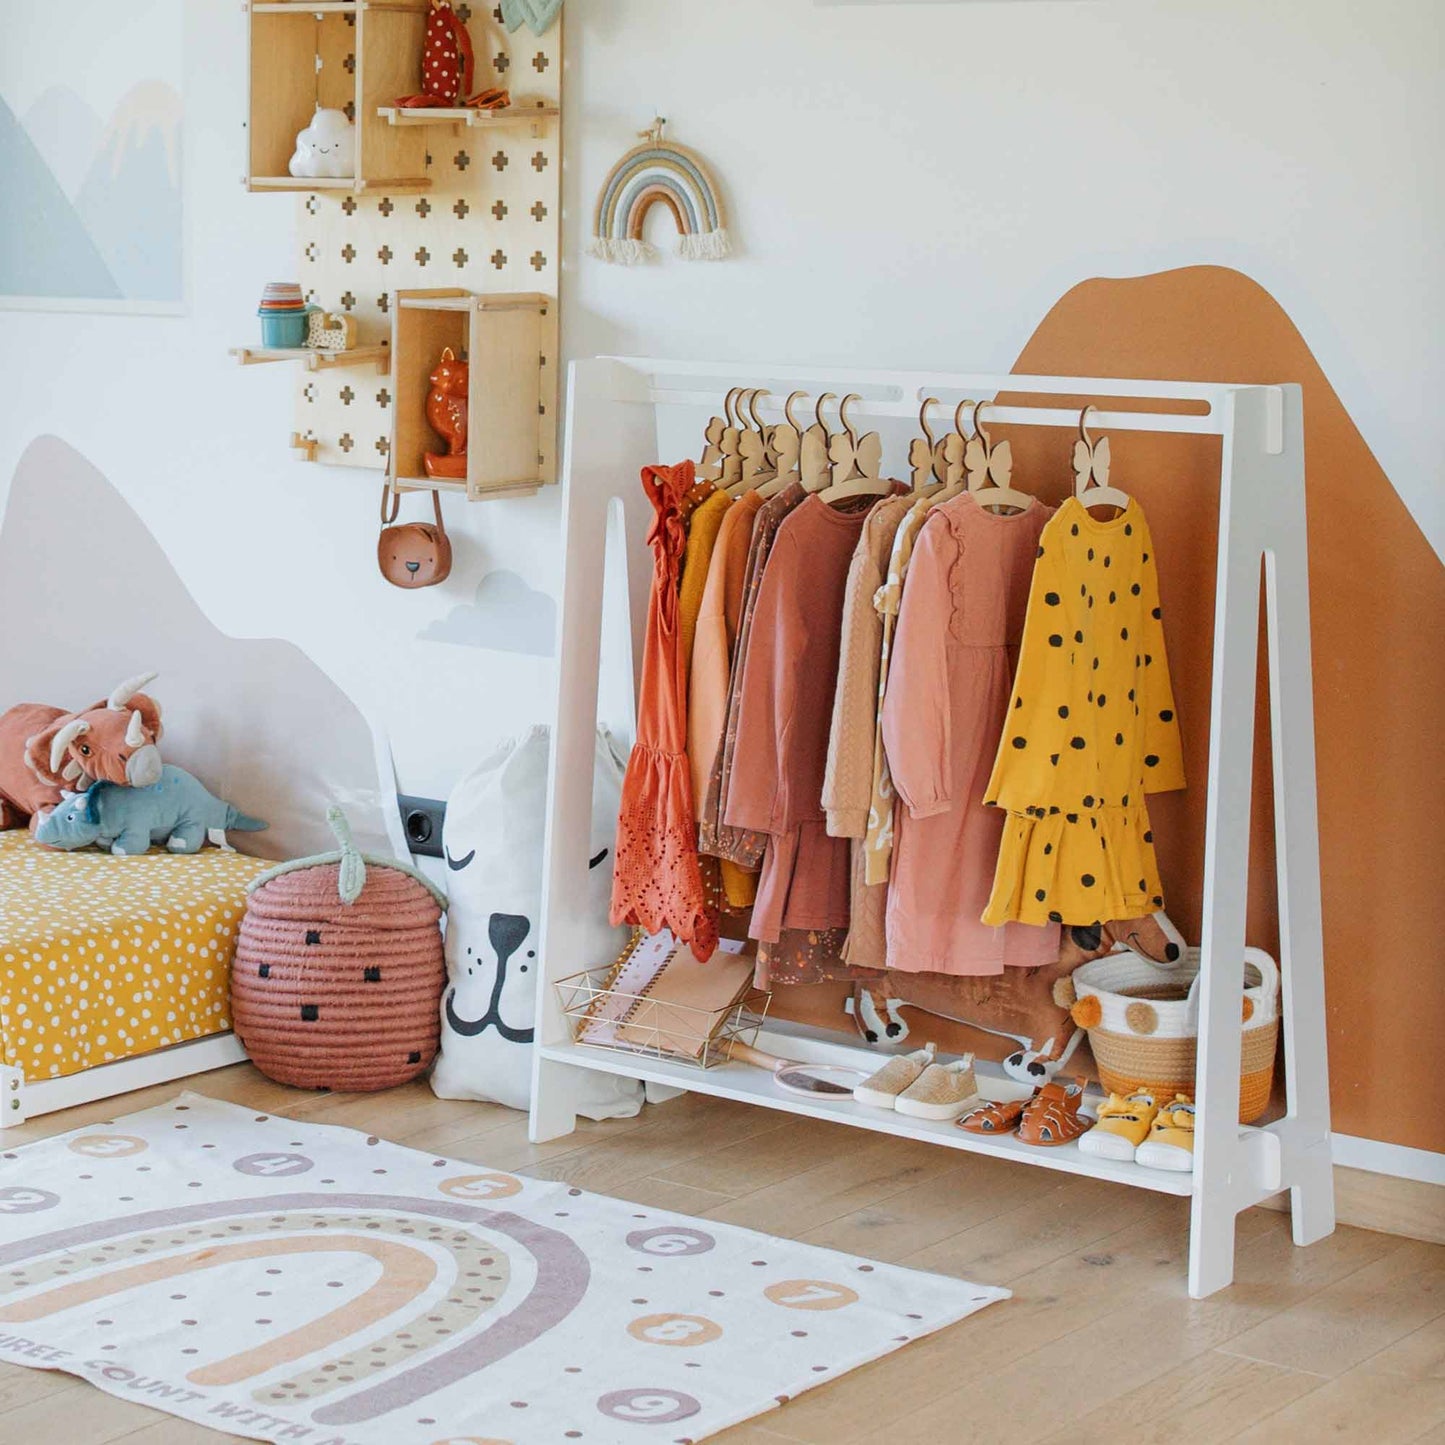 A neatly organized children's room features a Kids' clothing rack displaying colorful garments, a toy storage basket, a small bookshelf, and a decorative rainbow rug on the floor.